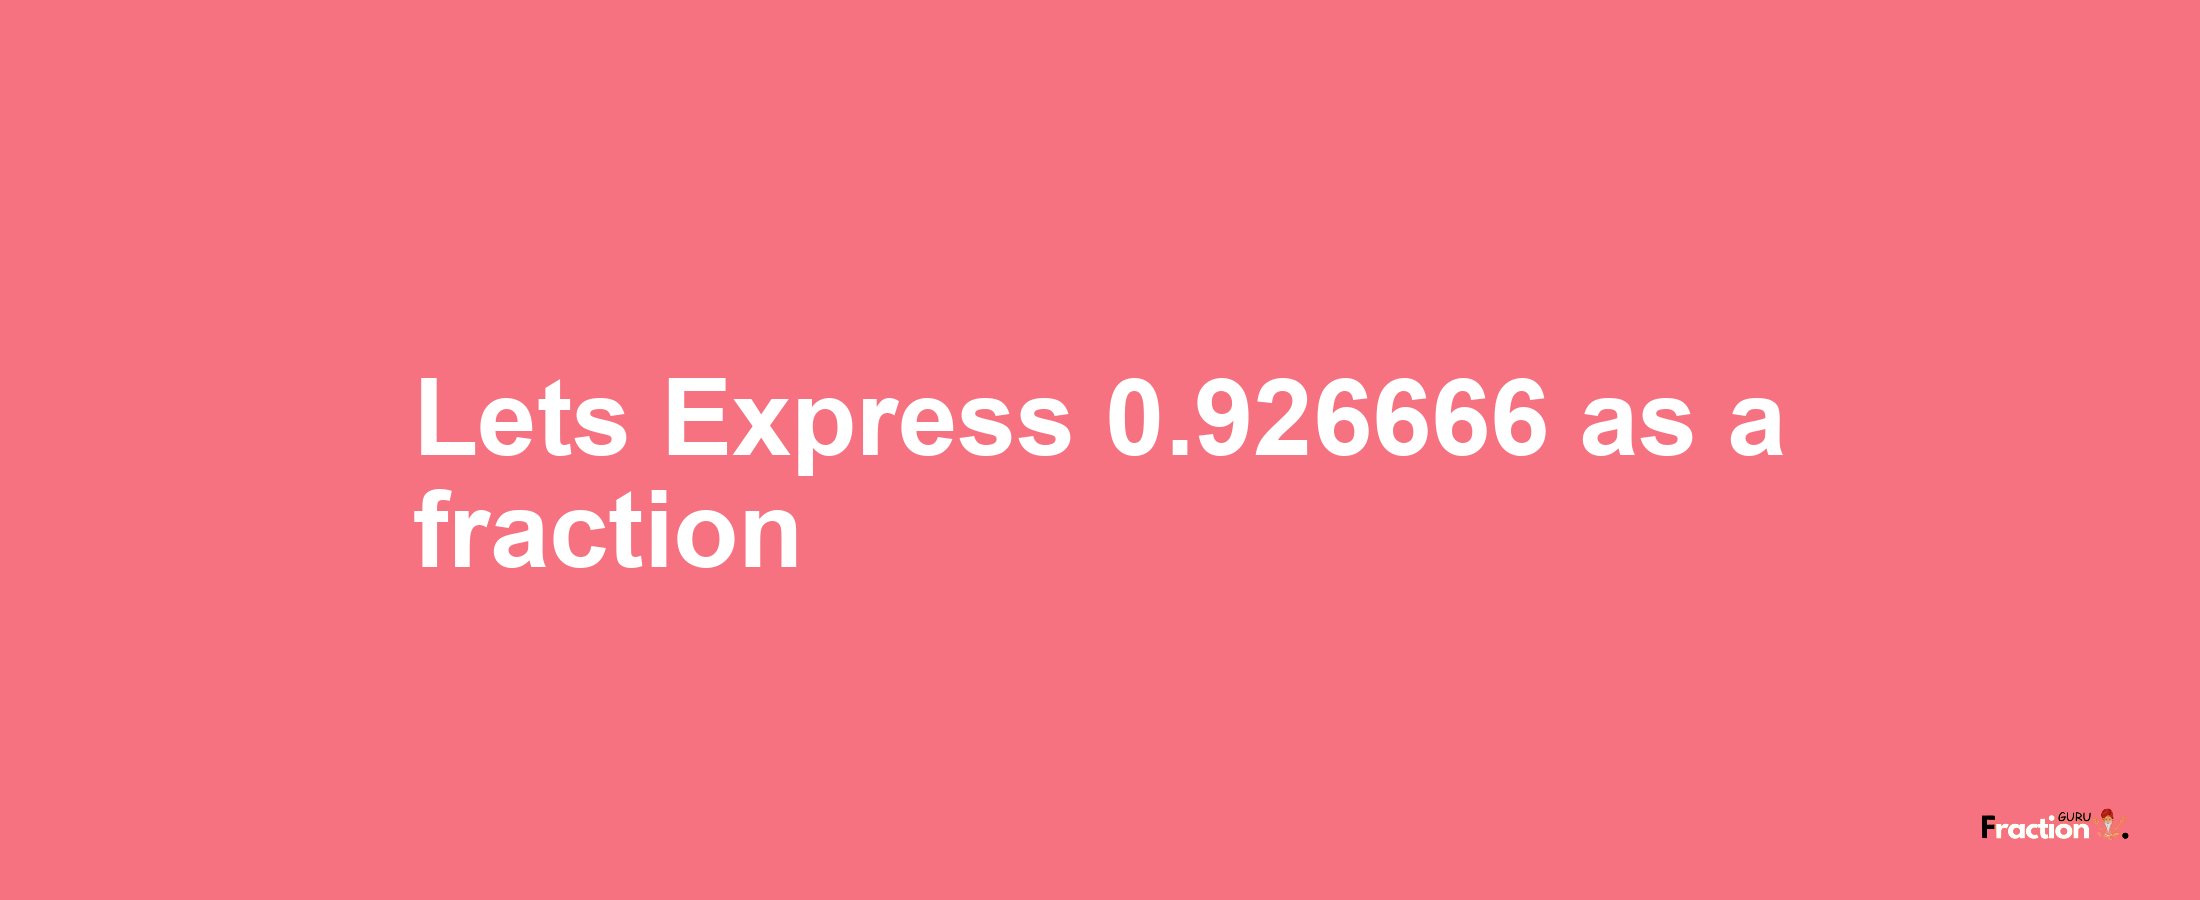 Lets Express 0.926666 as afraction